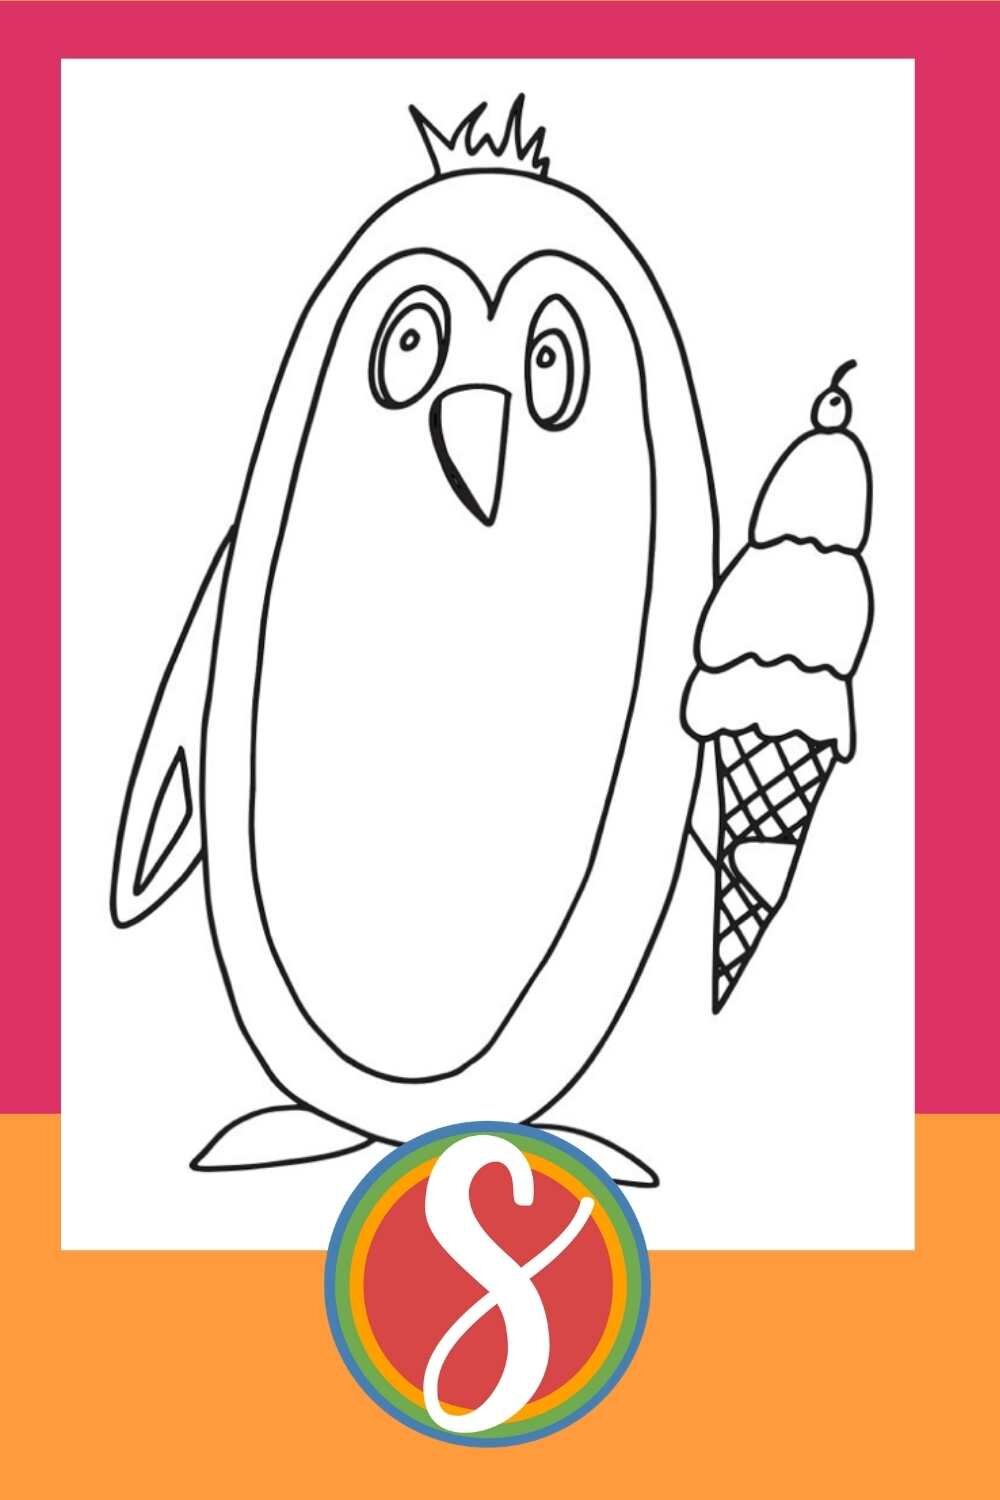 Penguin with Ice Cream - over 30 free penguin coloring pages all in one place!